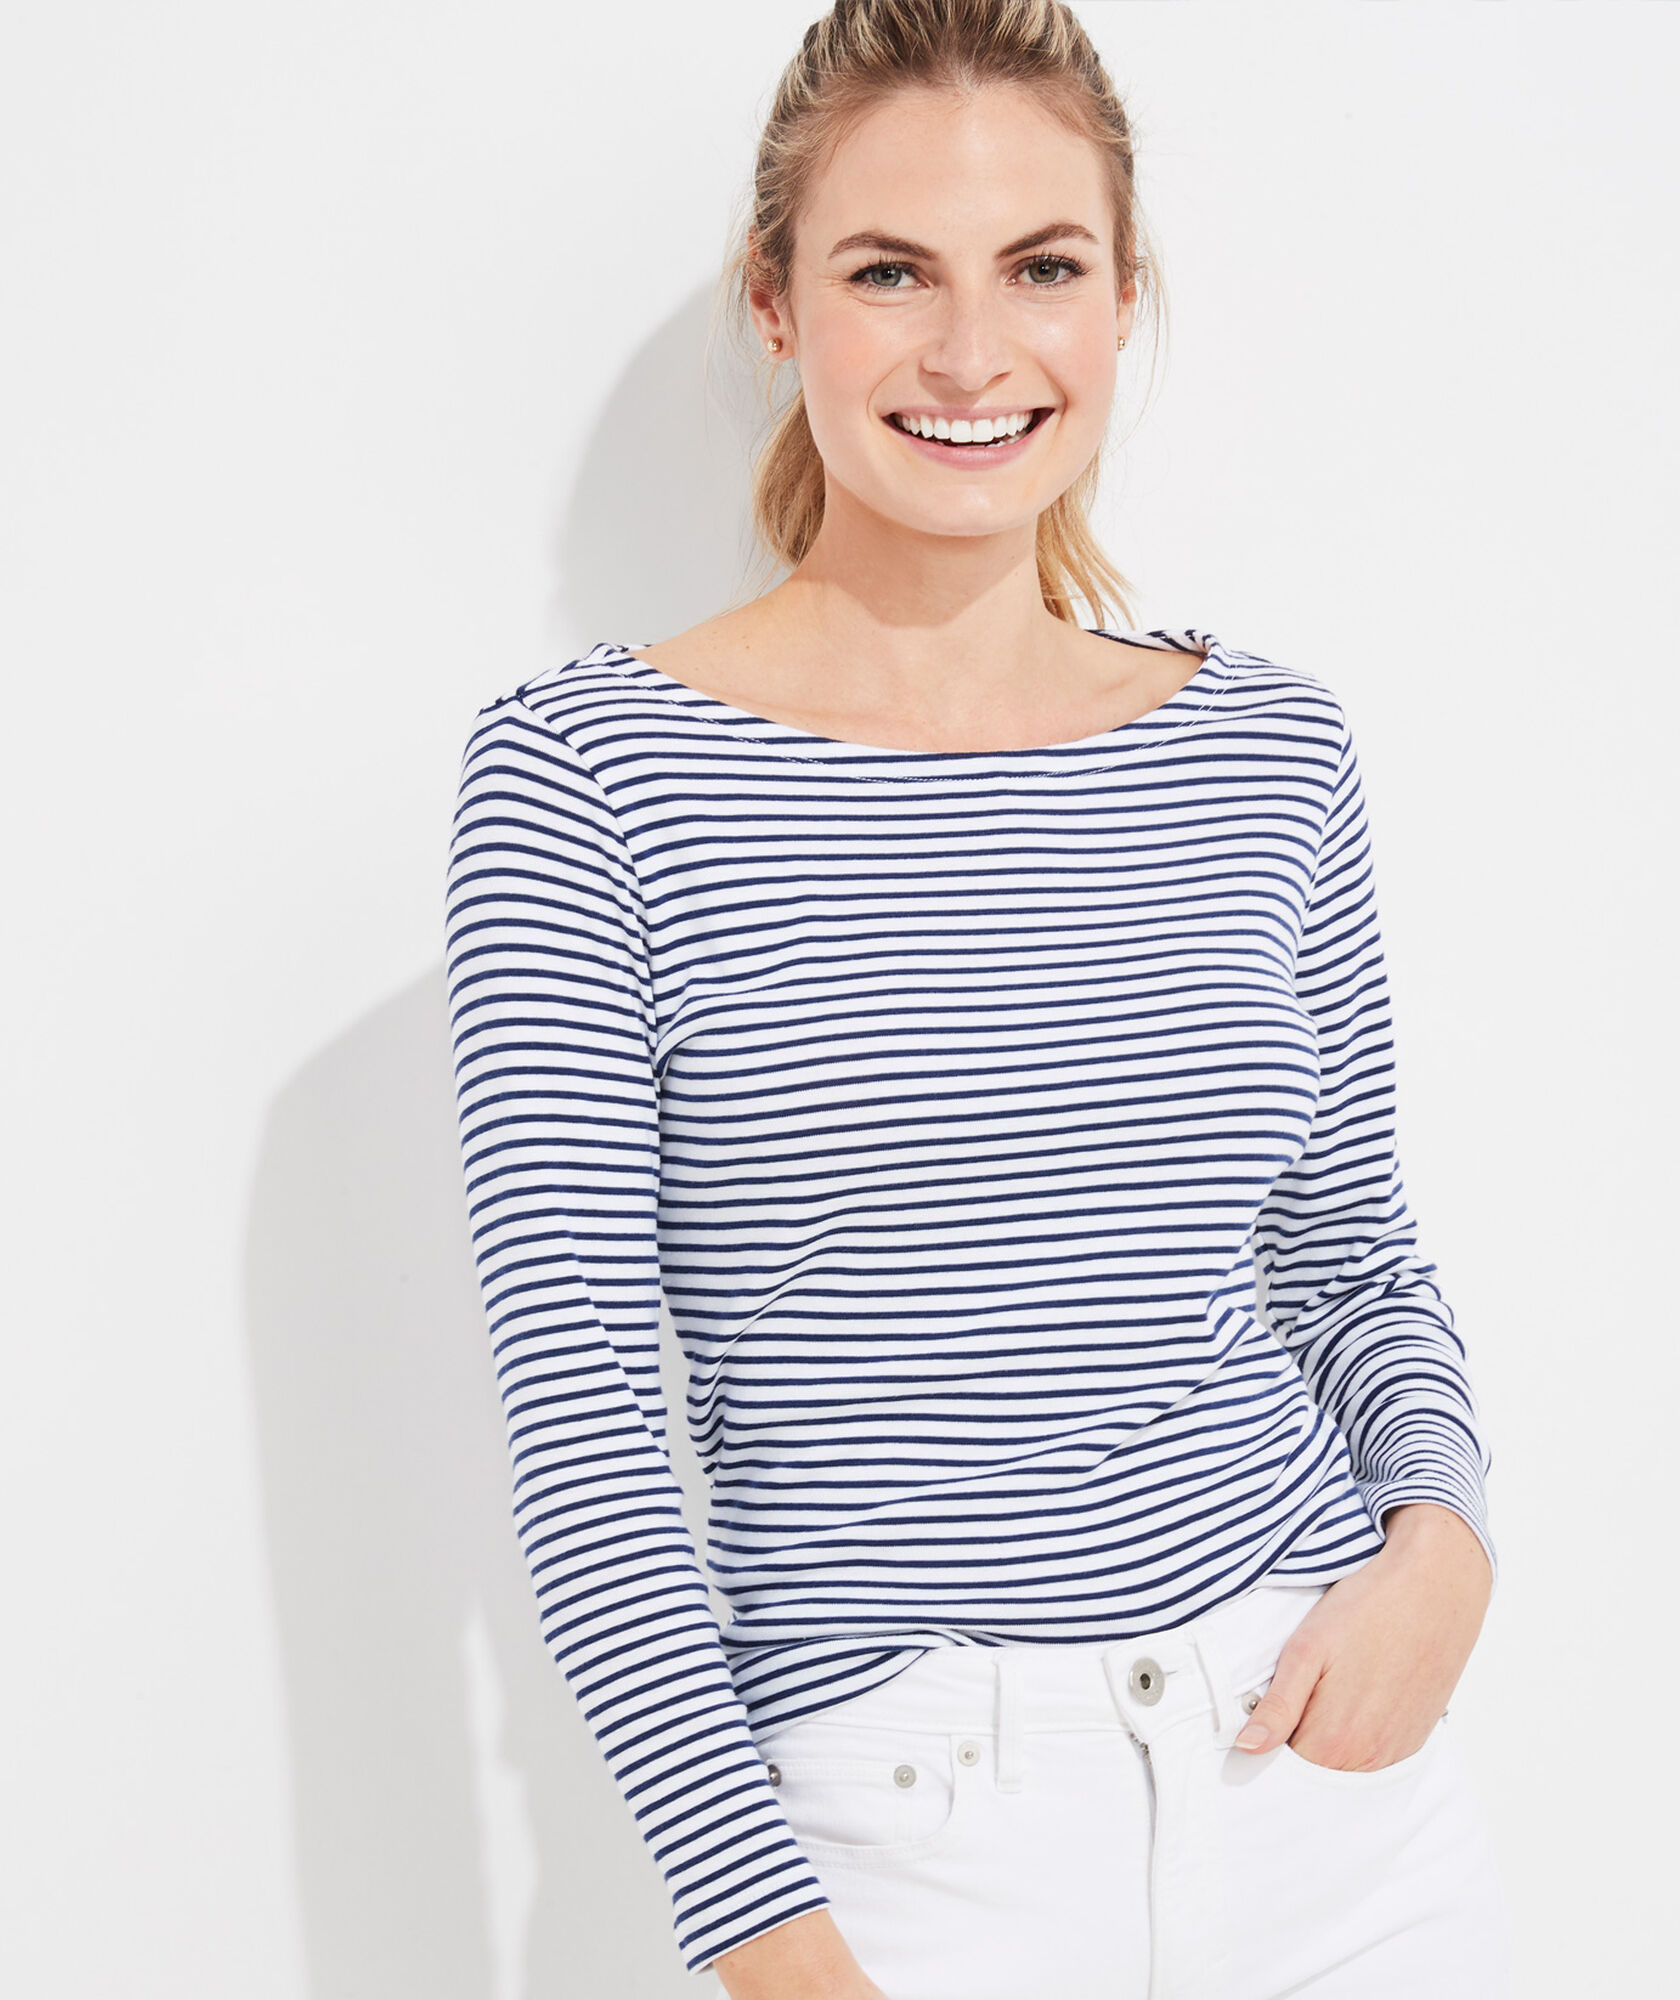 Vineyard Vines Outlet Apparel & More: Sitewide Coupon Up to 60% Off + Free Store Pickup or Free Shipping on $125+